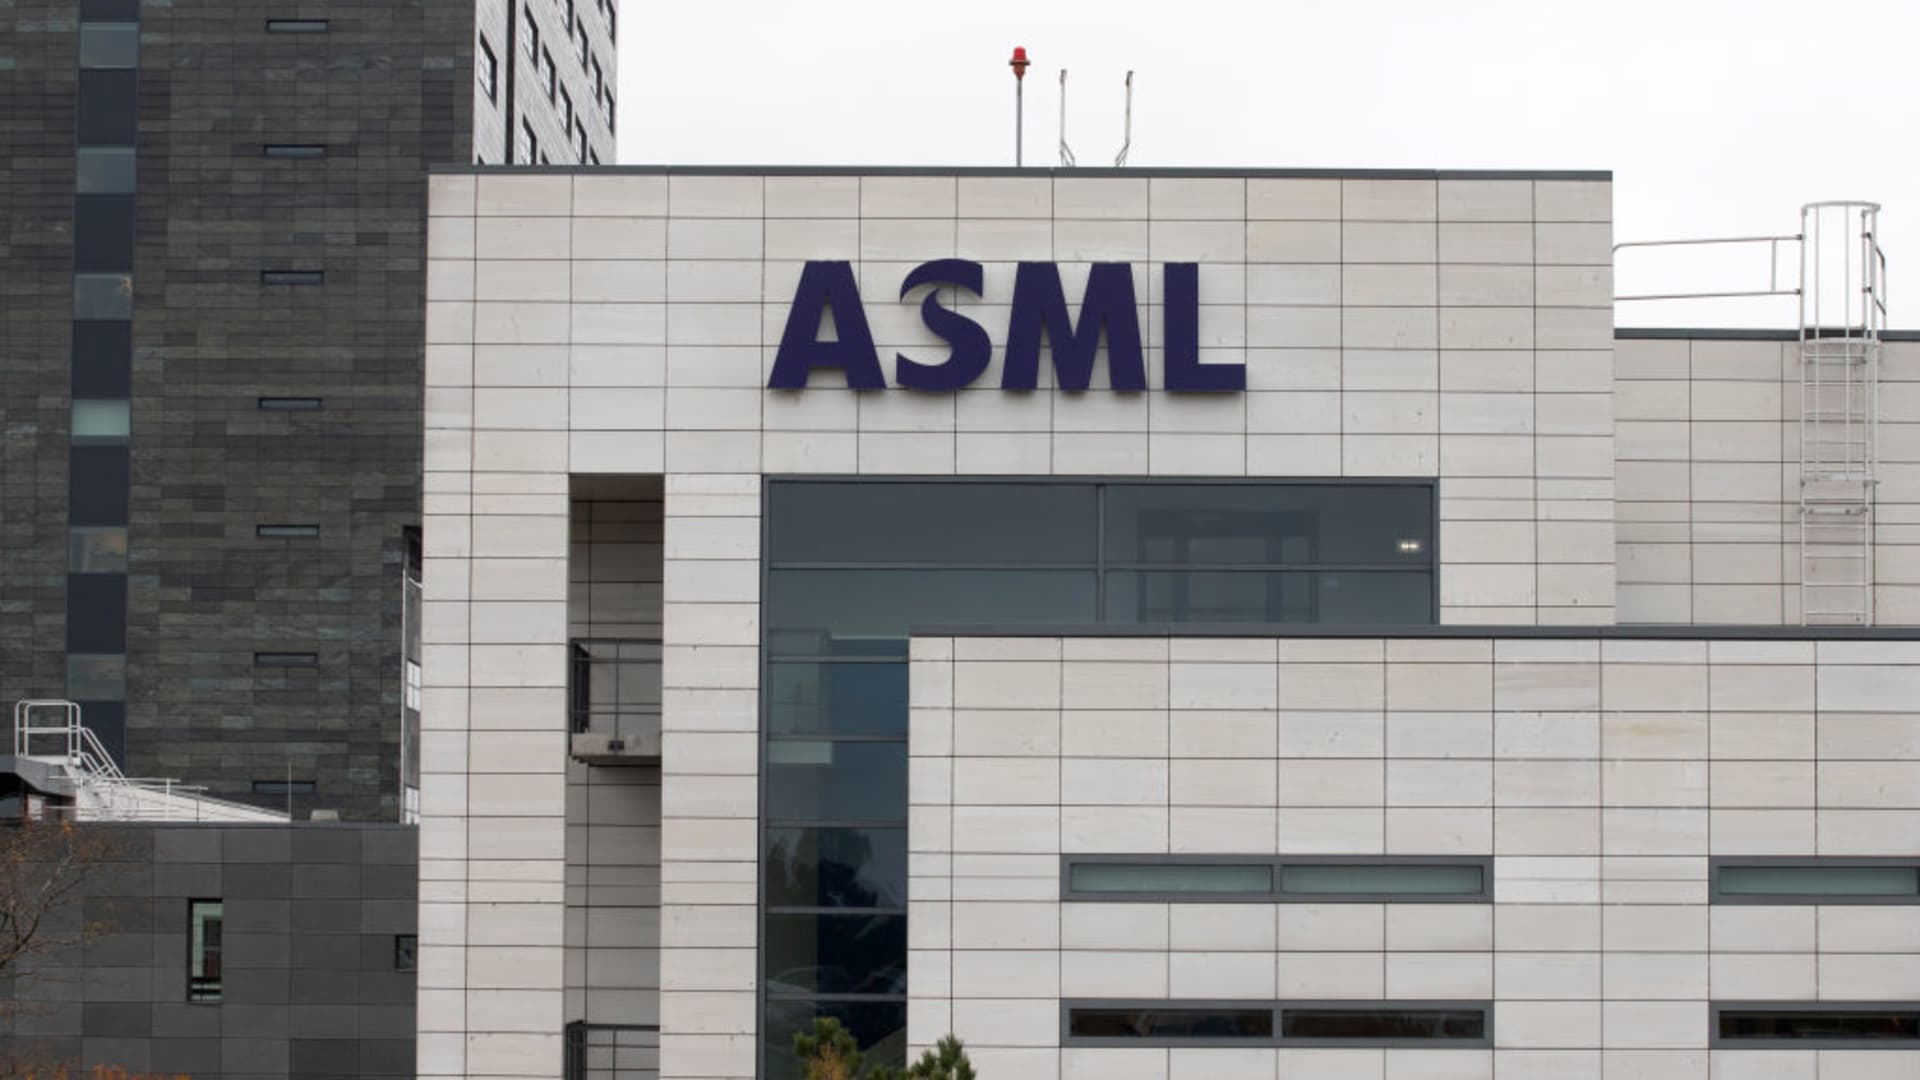 ASML shares surged more than 30% this year. Here's where Wall Street sees the stock going